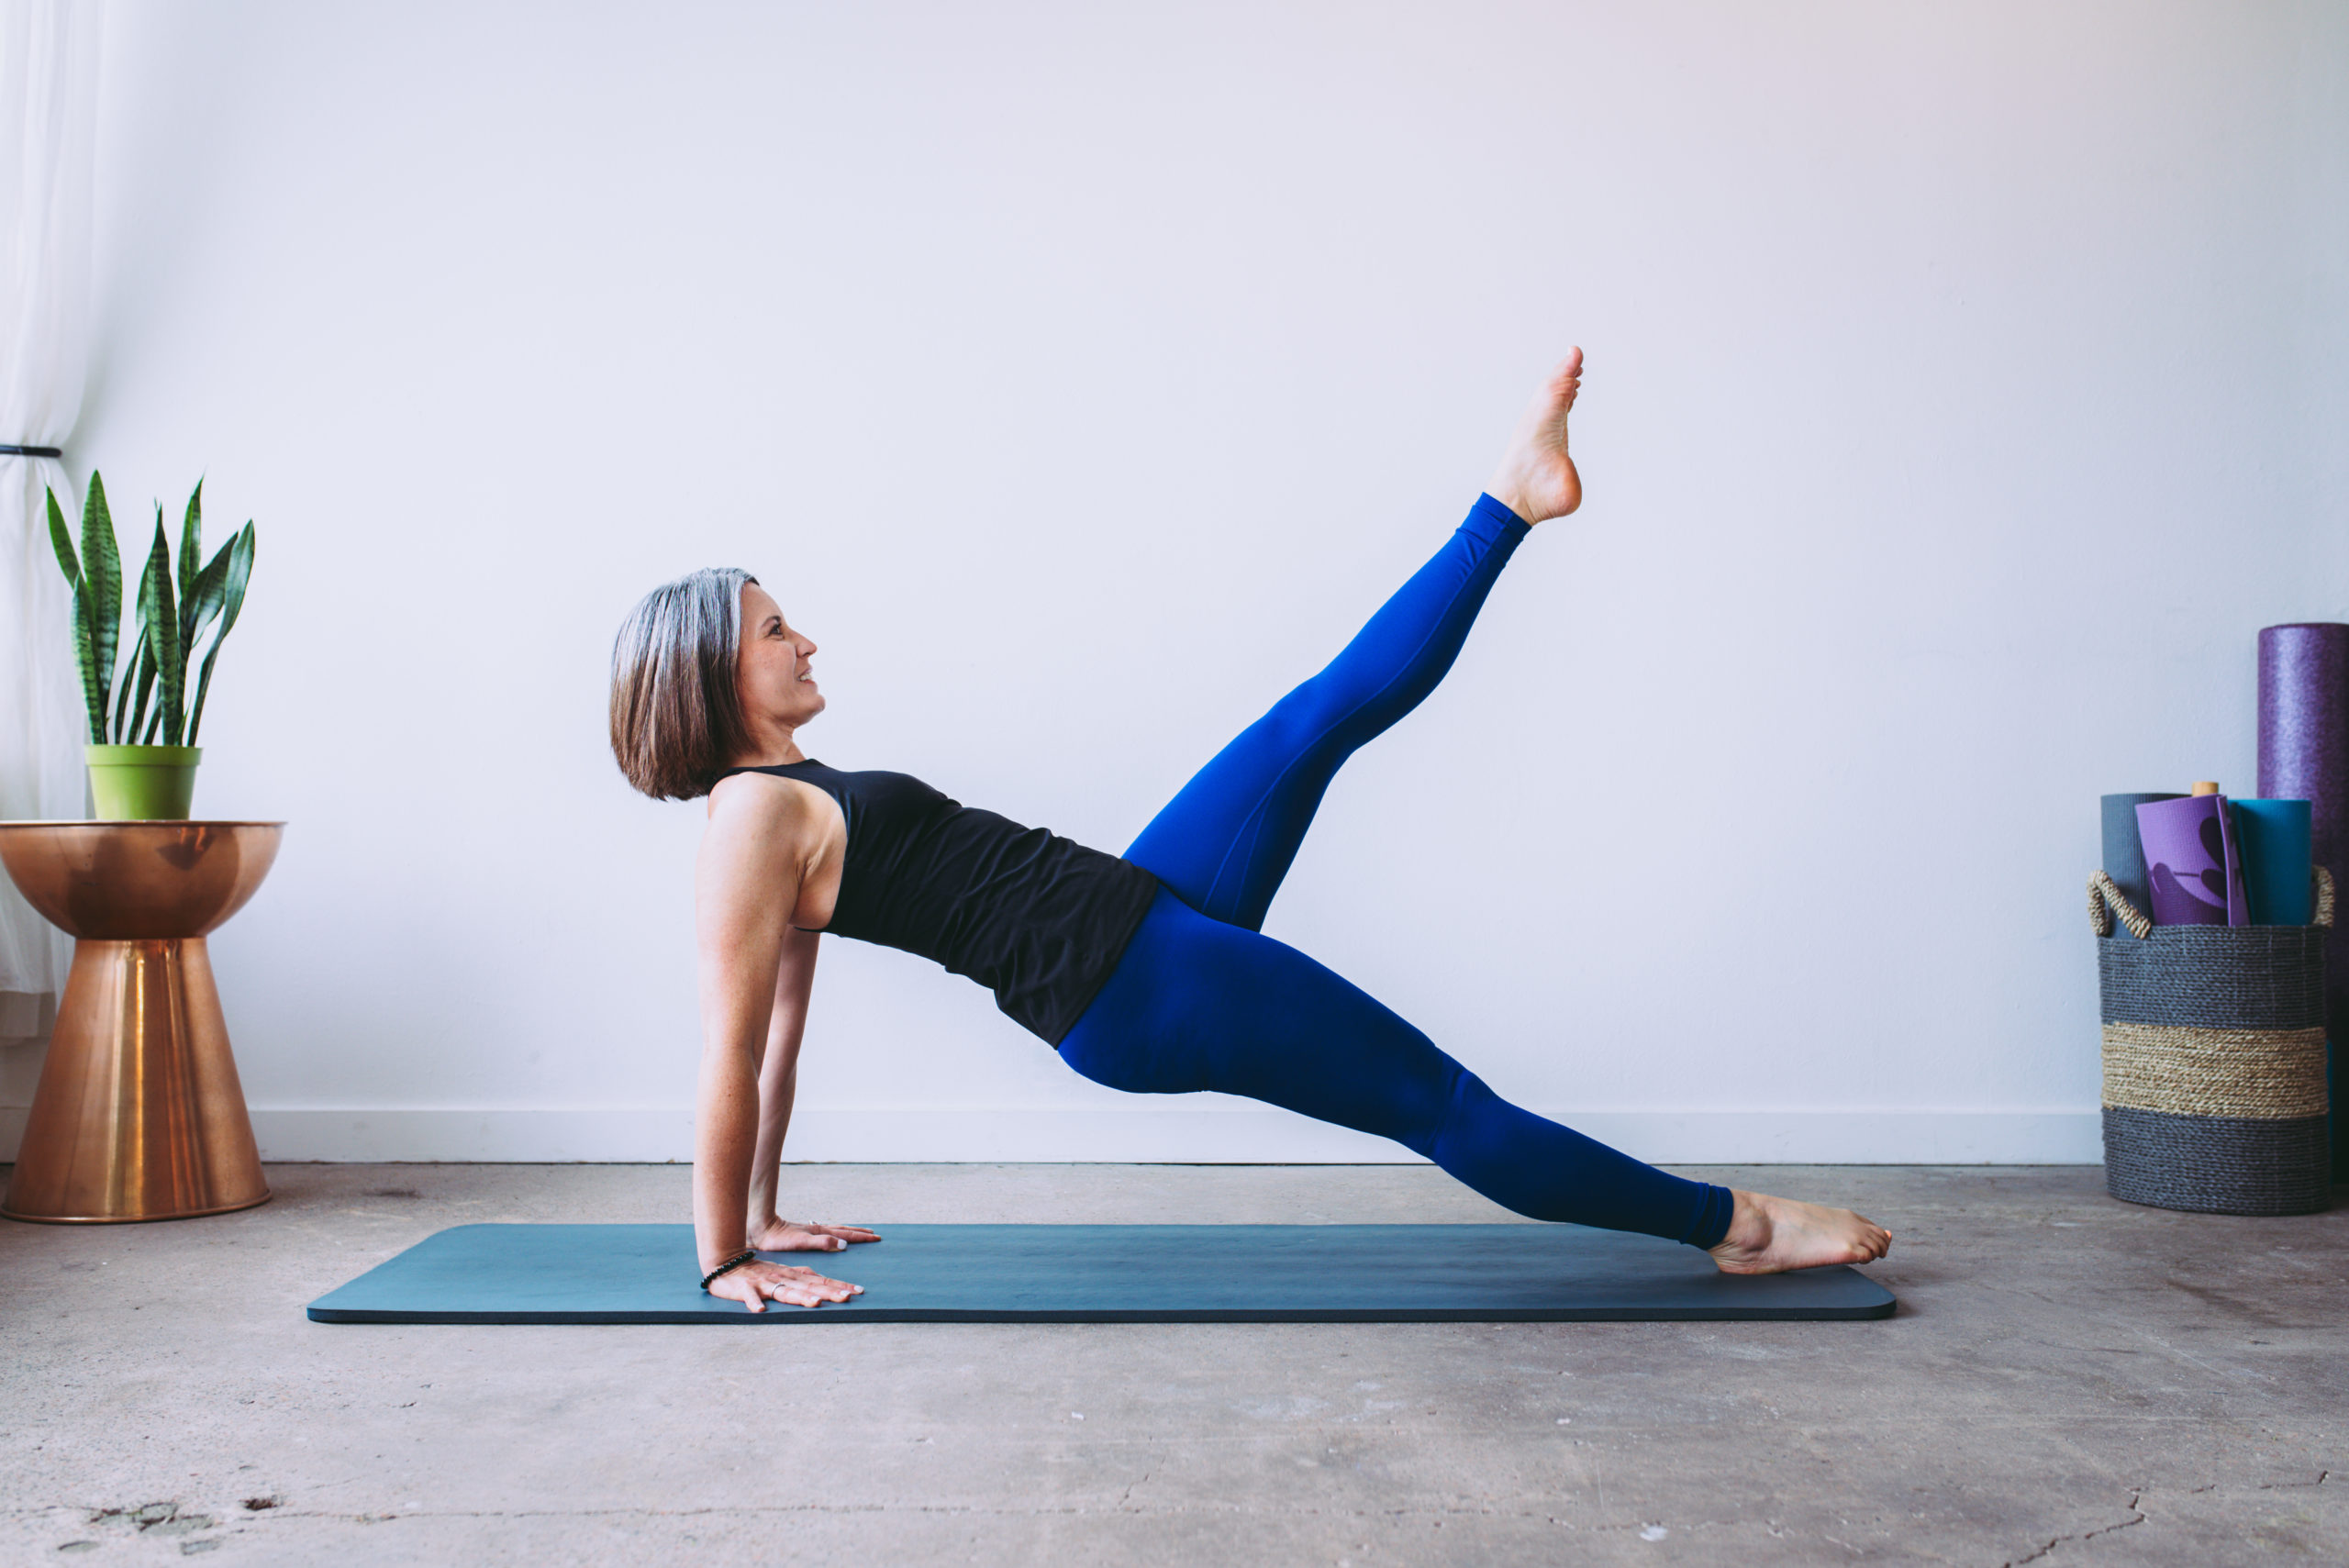 Beth doing Pilates mat exercise, balance control back wearing blue leggings and black top on a grey Pilates